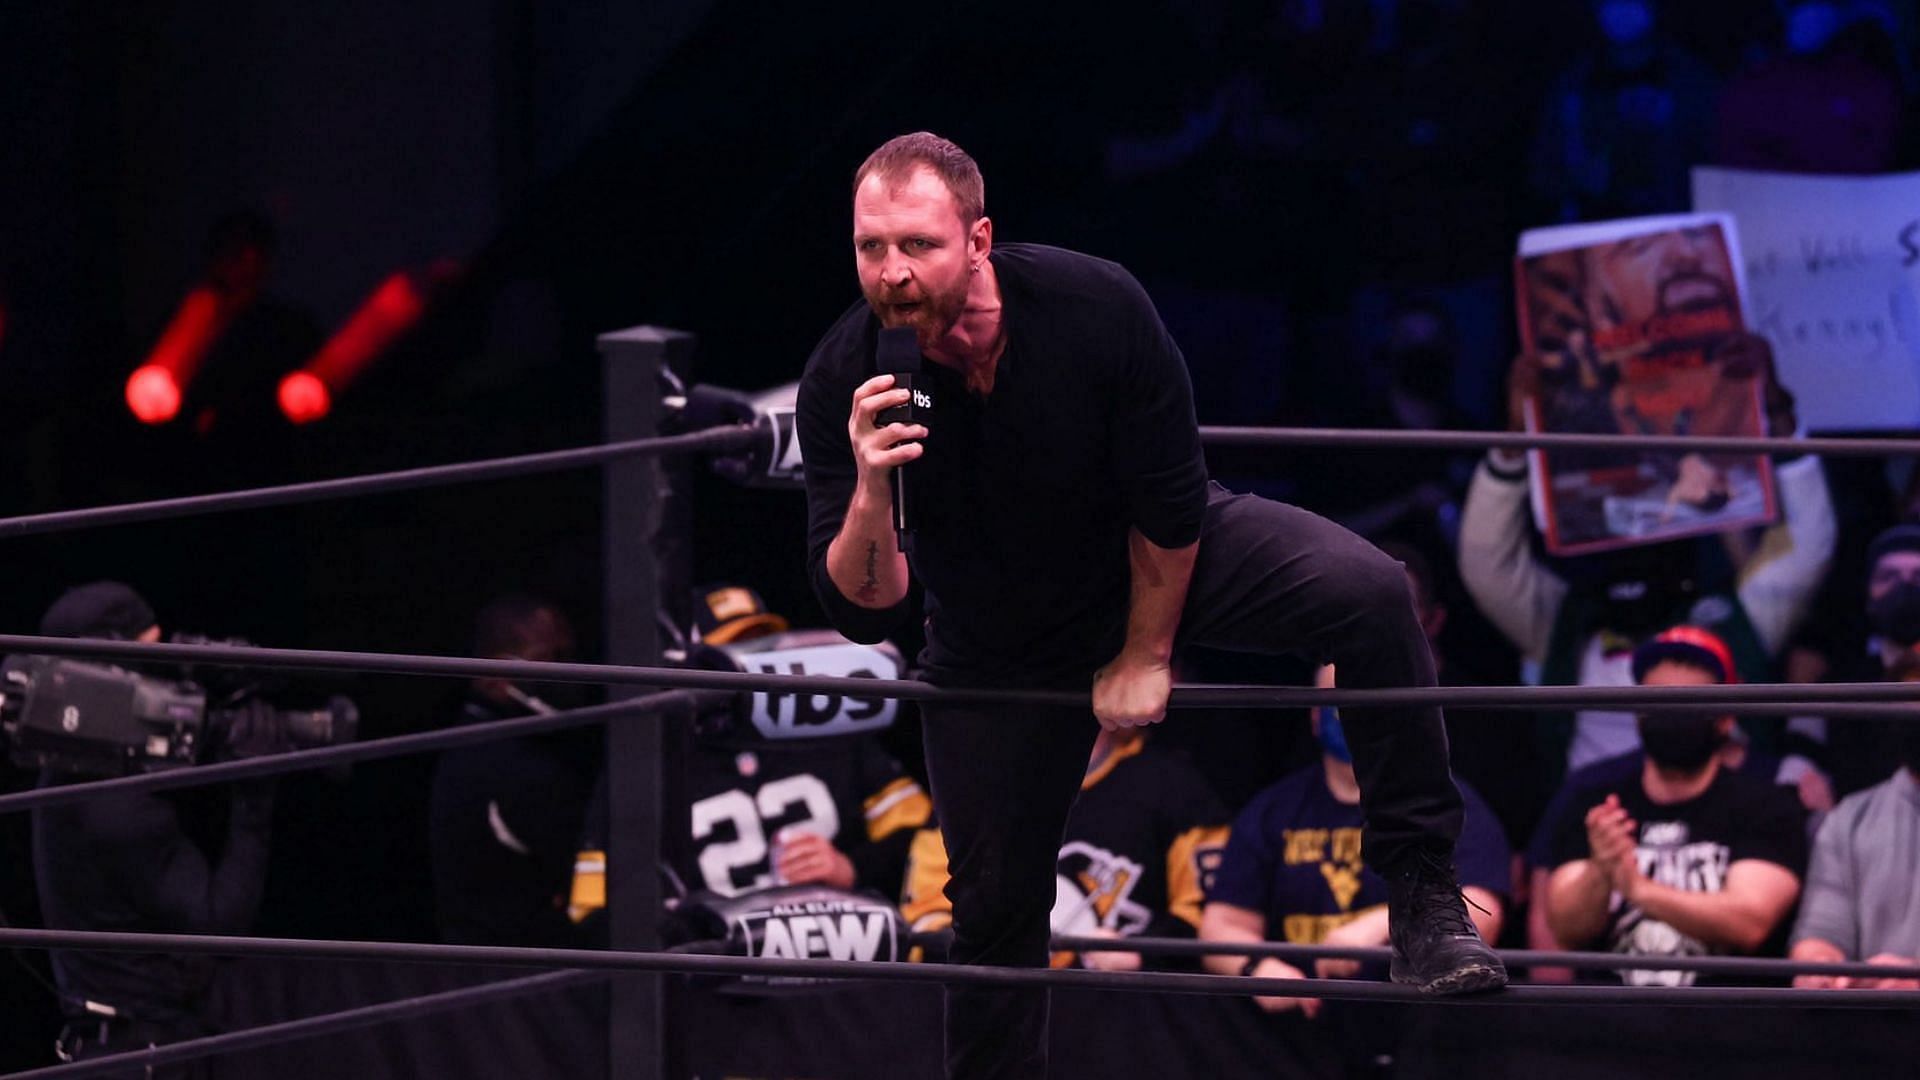 Jon Moxley recently made his return to AEW and is set for a feud against Bryan Danielson